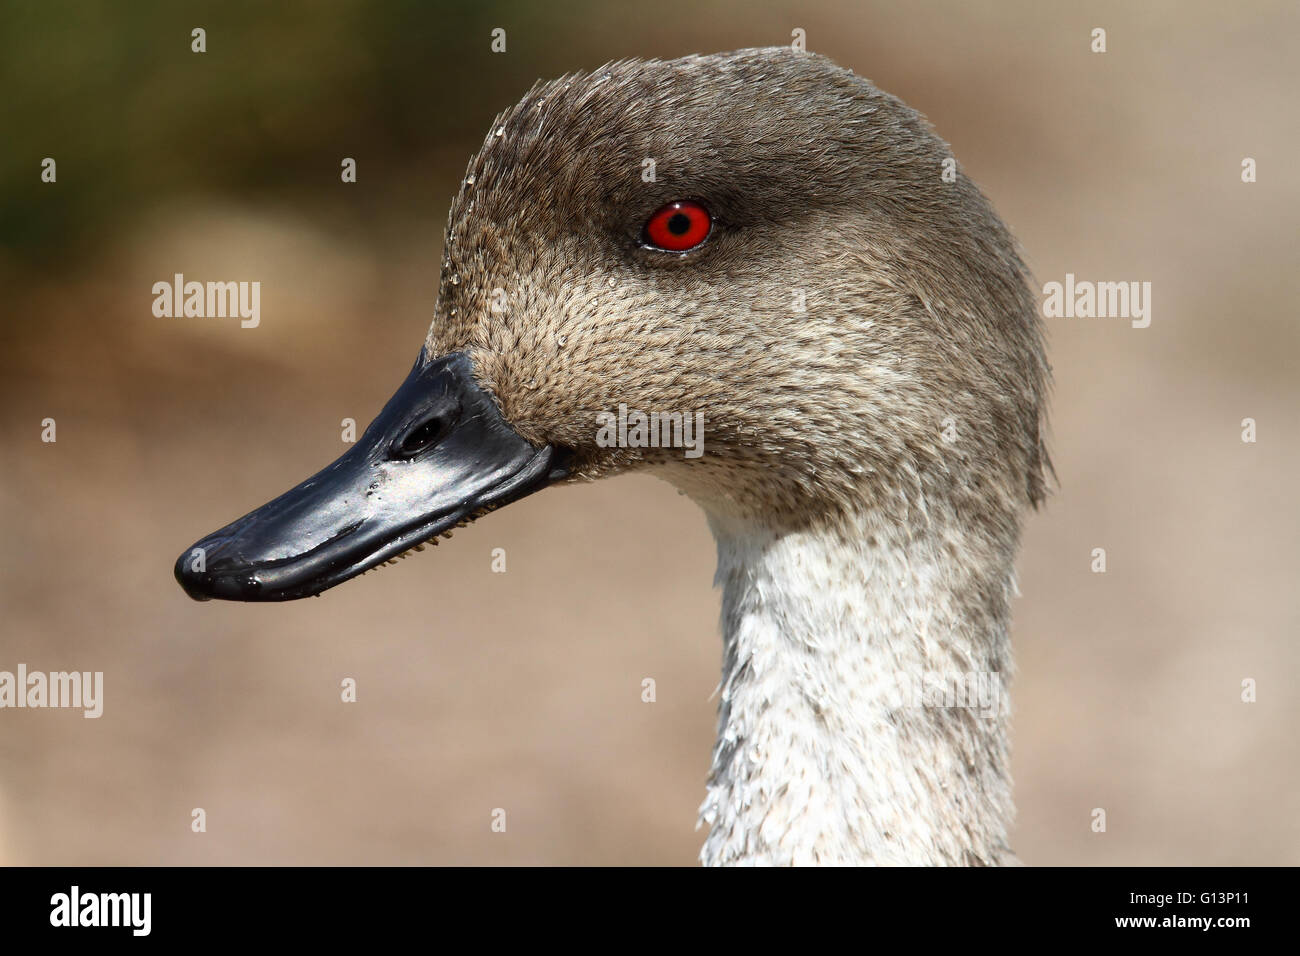 Patagonian Crested Duck (Lophonetta specularioides) Stock Photo